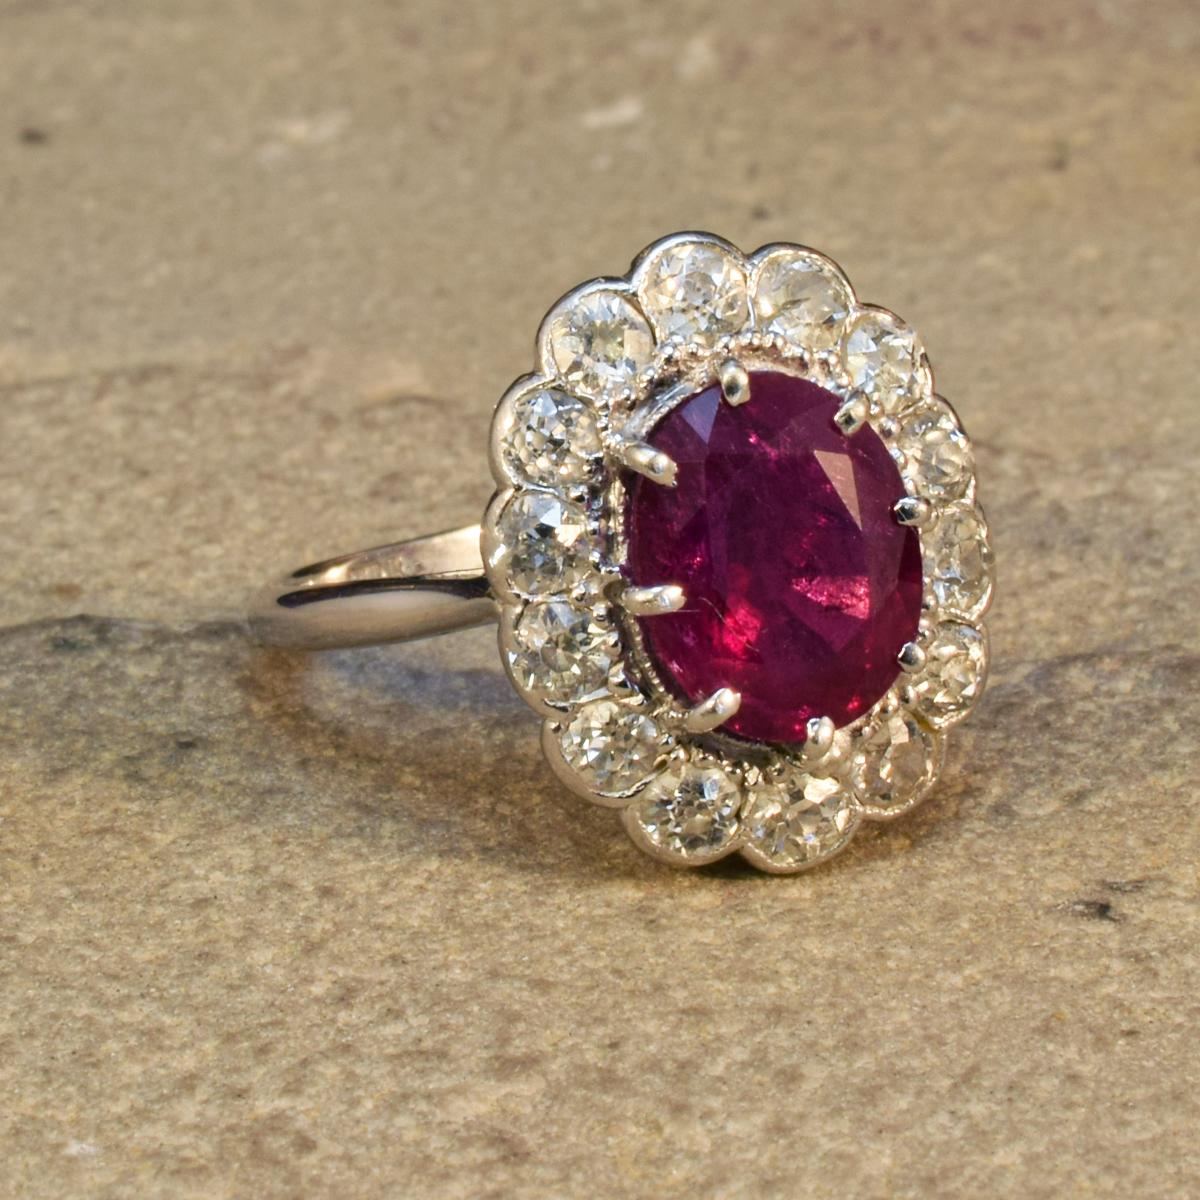 A classic Edwardian cluster ring, handmade with quality craftsmanship. It has been modelled in Platinum and 18ct White Gold with markings on the inner band (faded). The design features an oval cut 0.80ct Ruby in the centre with a claw setting and a